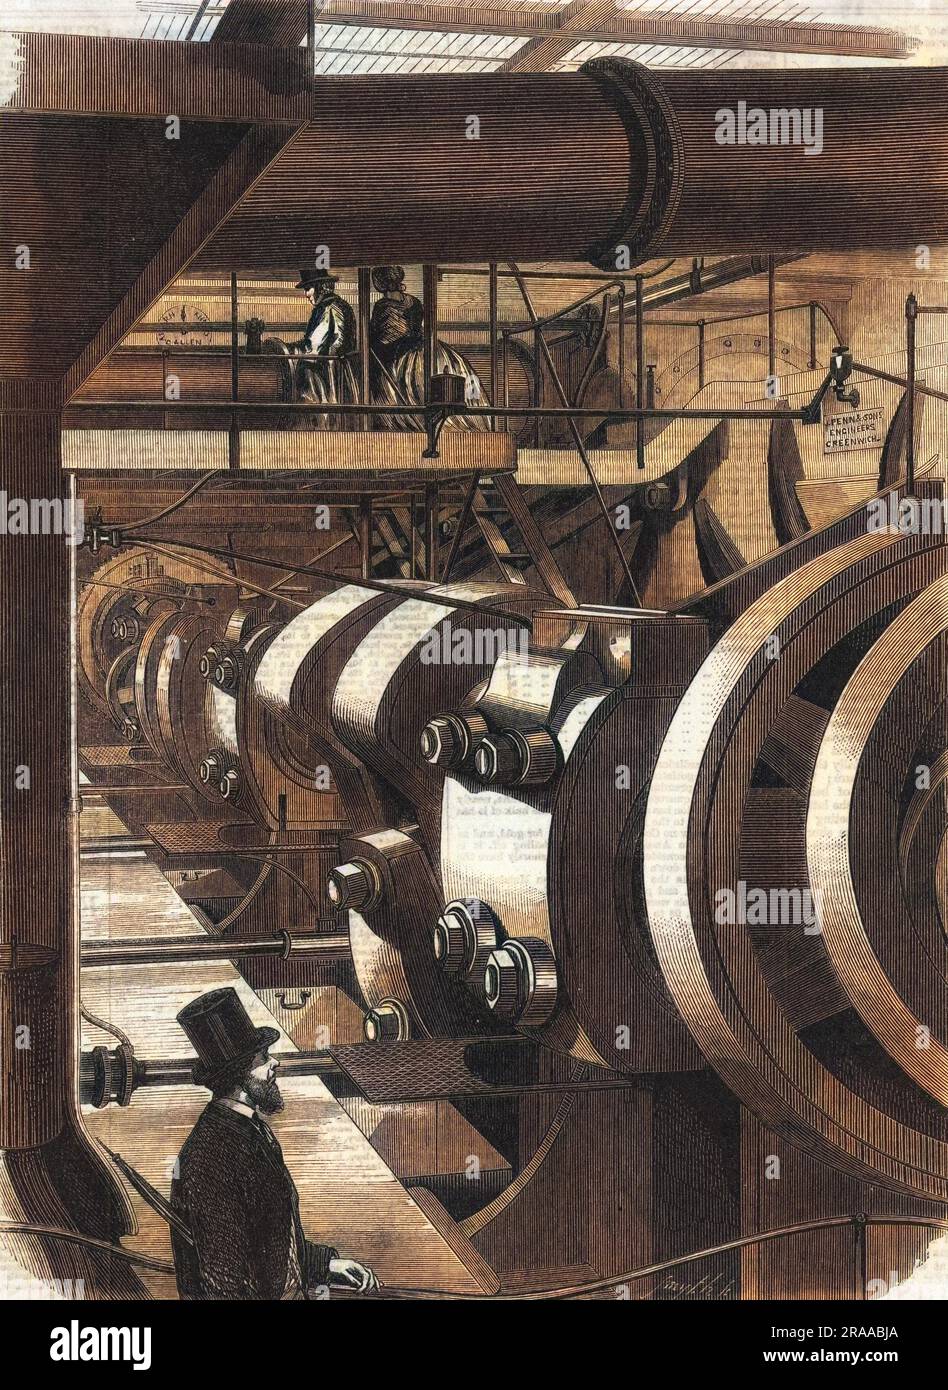 The engine room of the iron-clad warship H.M.S. Warrior     Date: 1861 Stock Photo